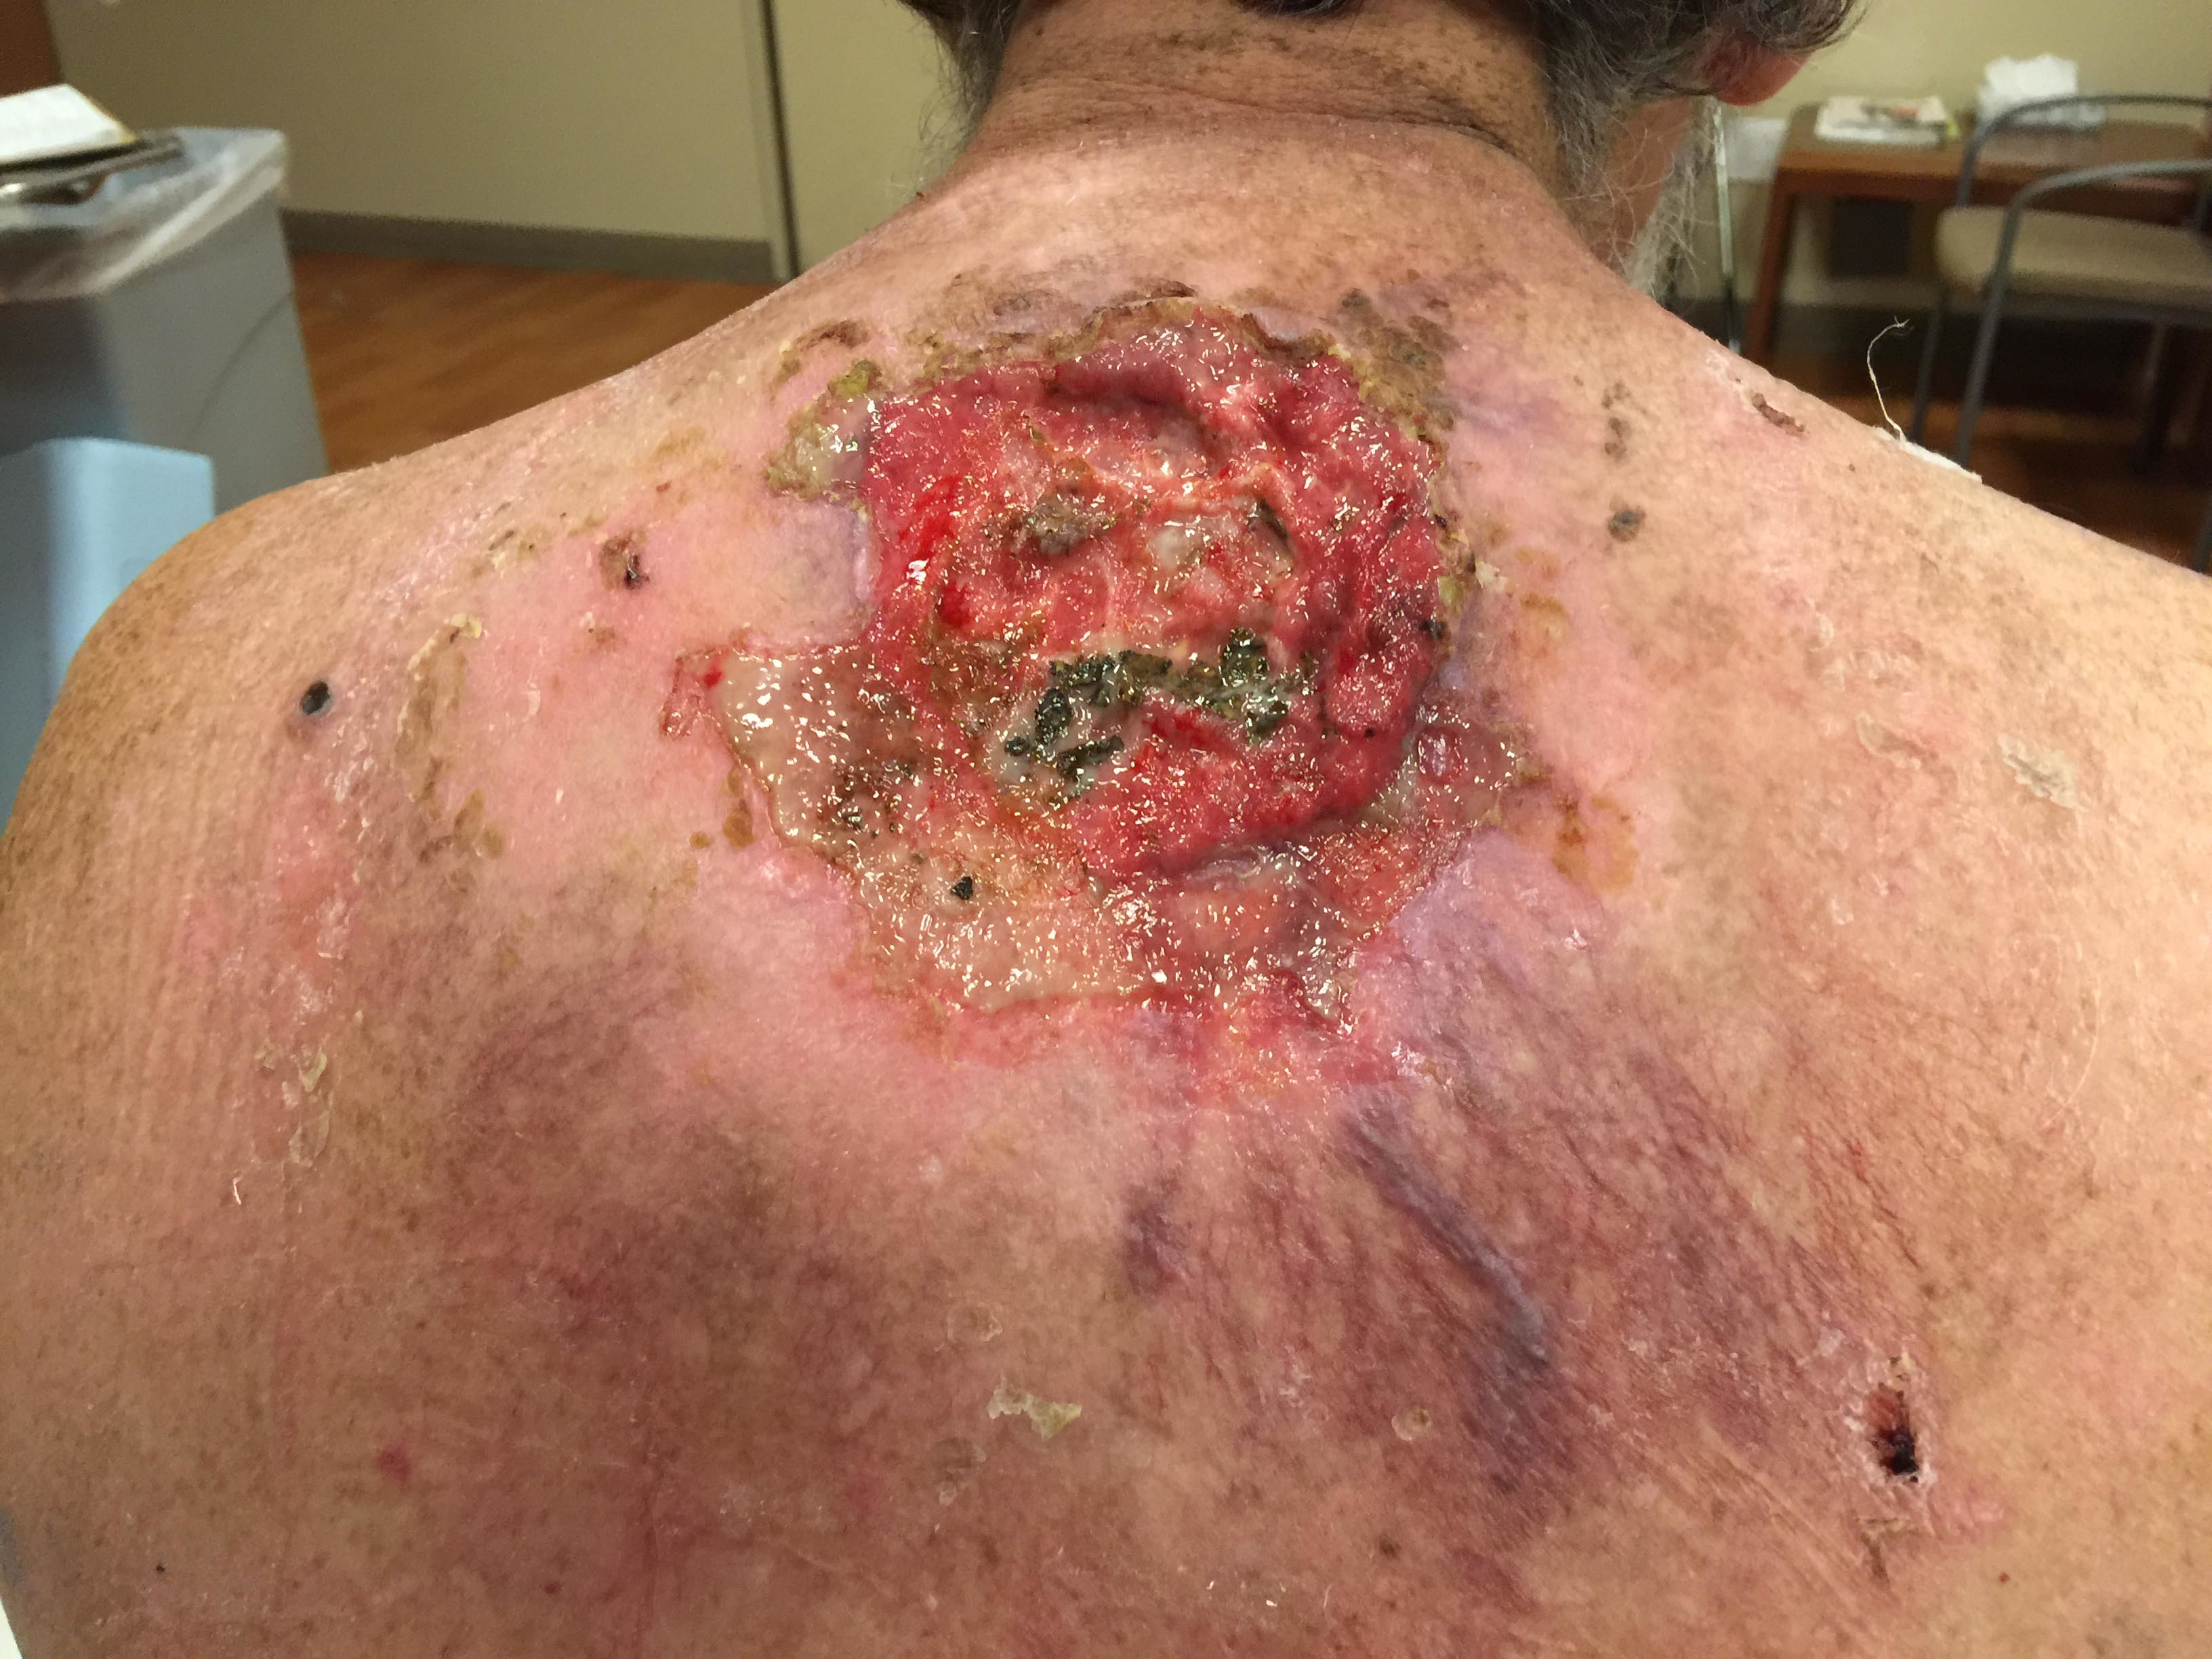 Basal Cell Carcinoma: Causes, Symptoms ... - webmd.com